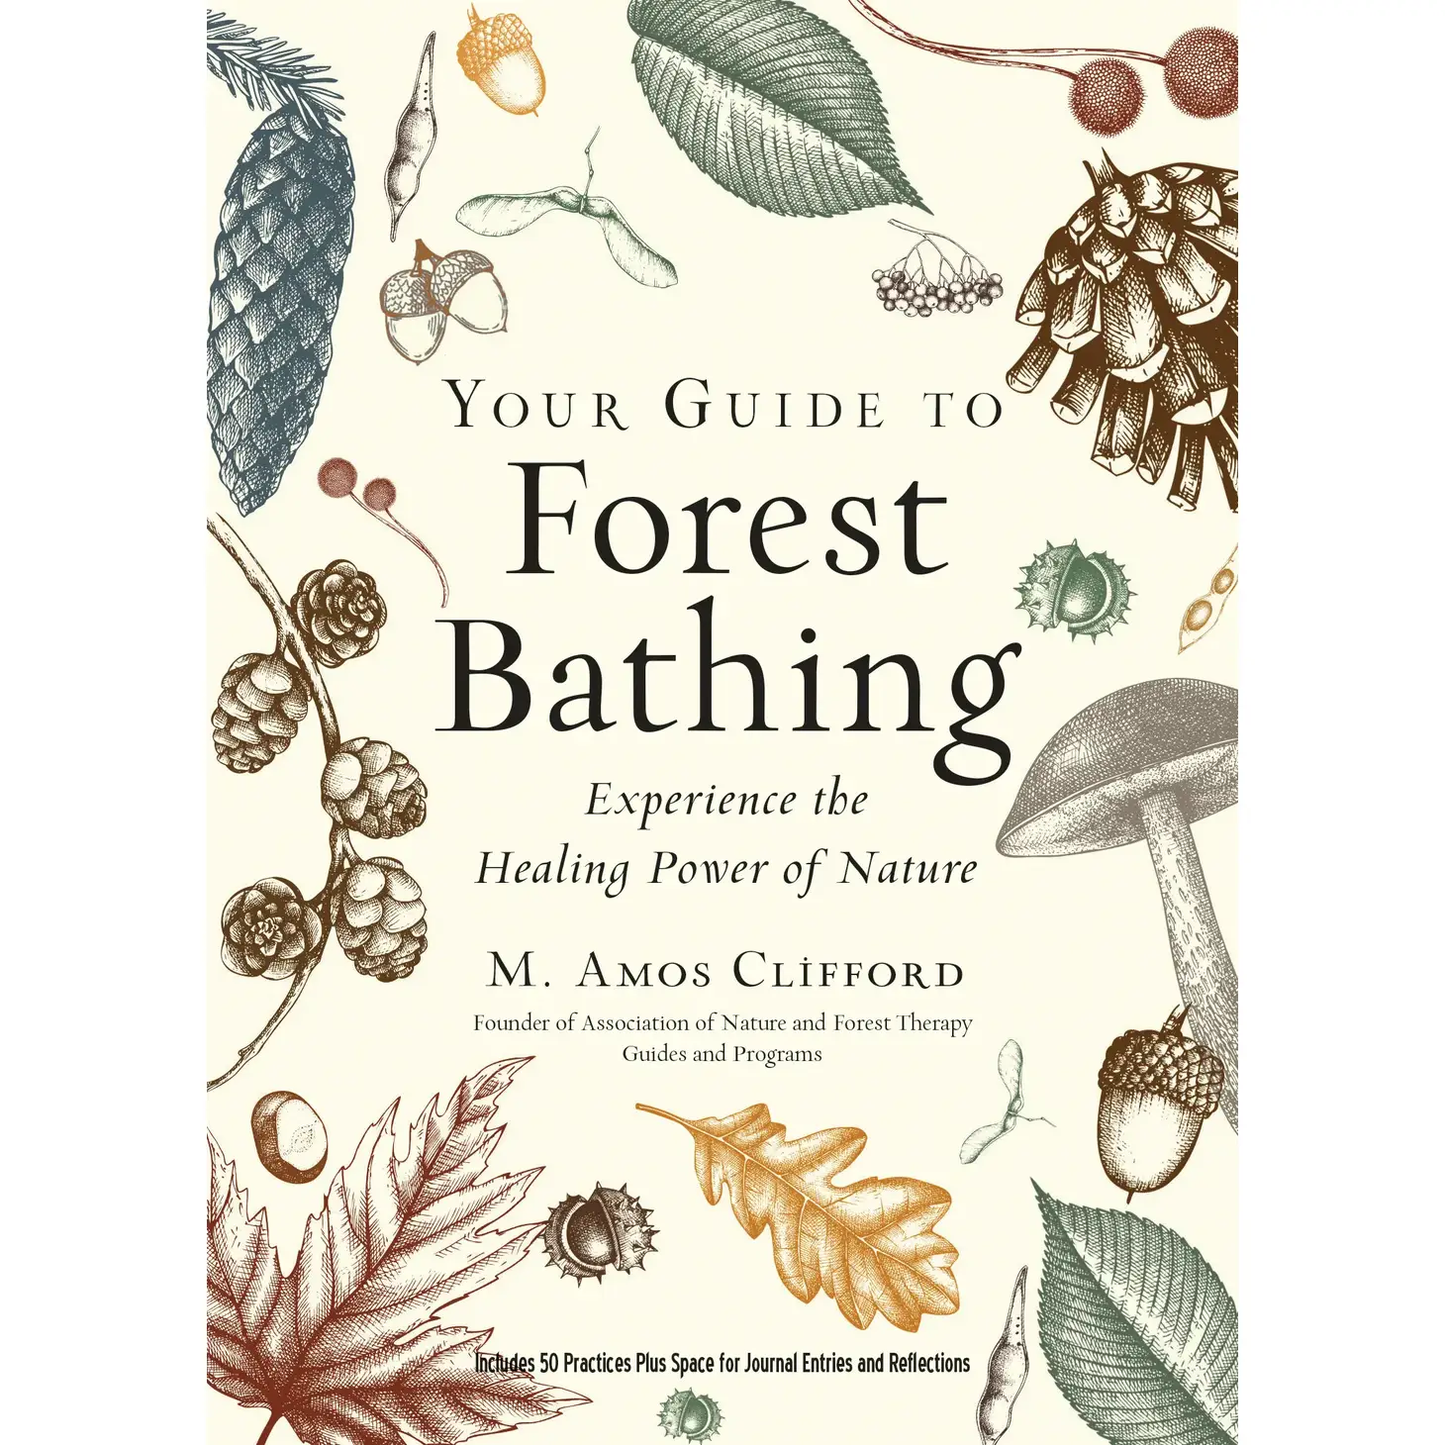 Your Guide to Forest Bathing (Expanded Edition)